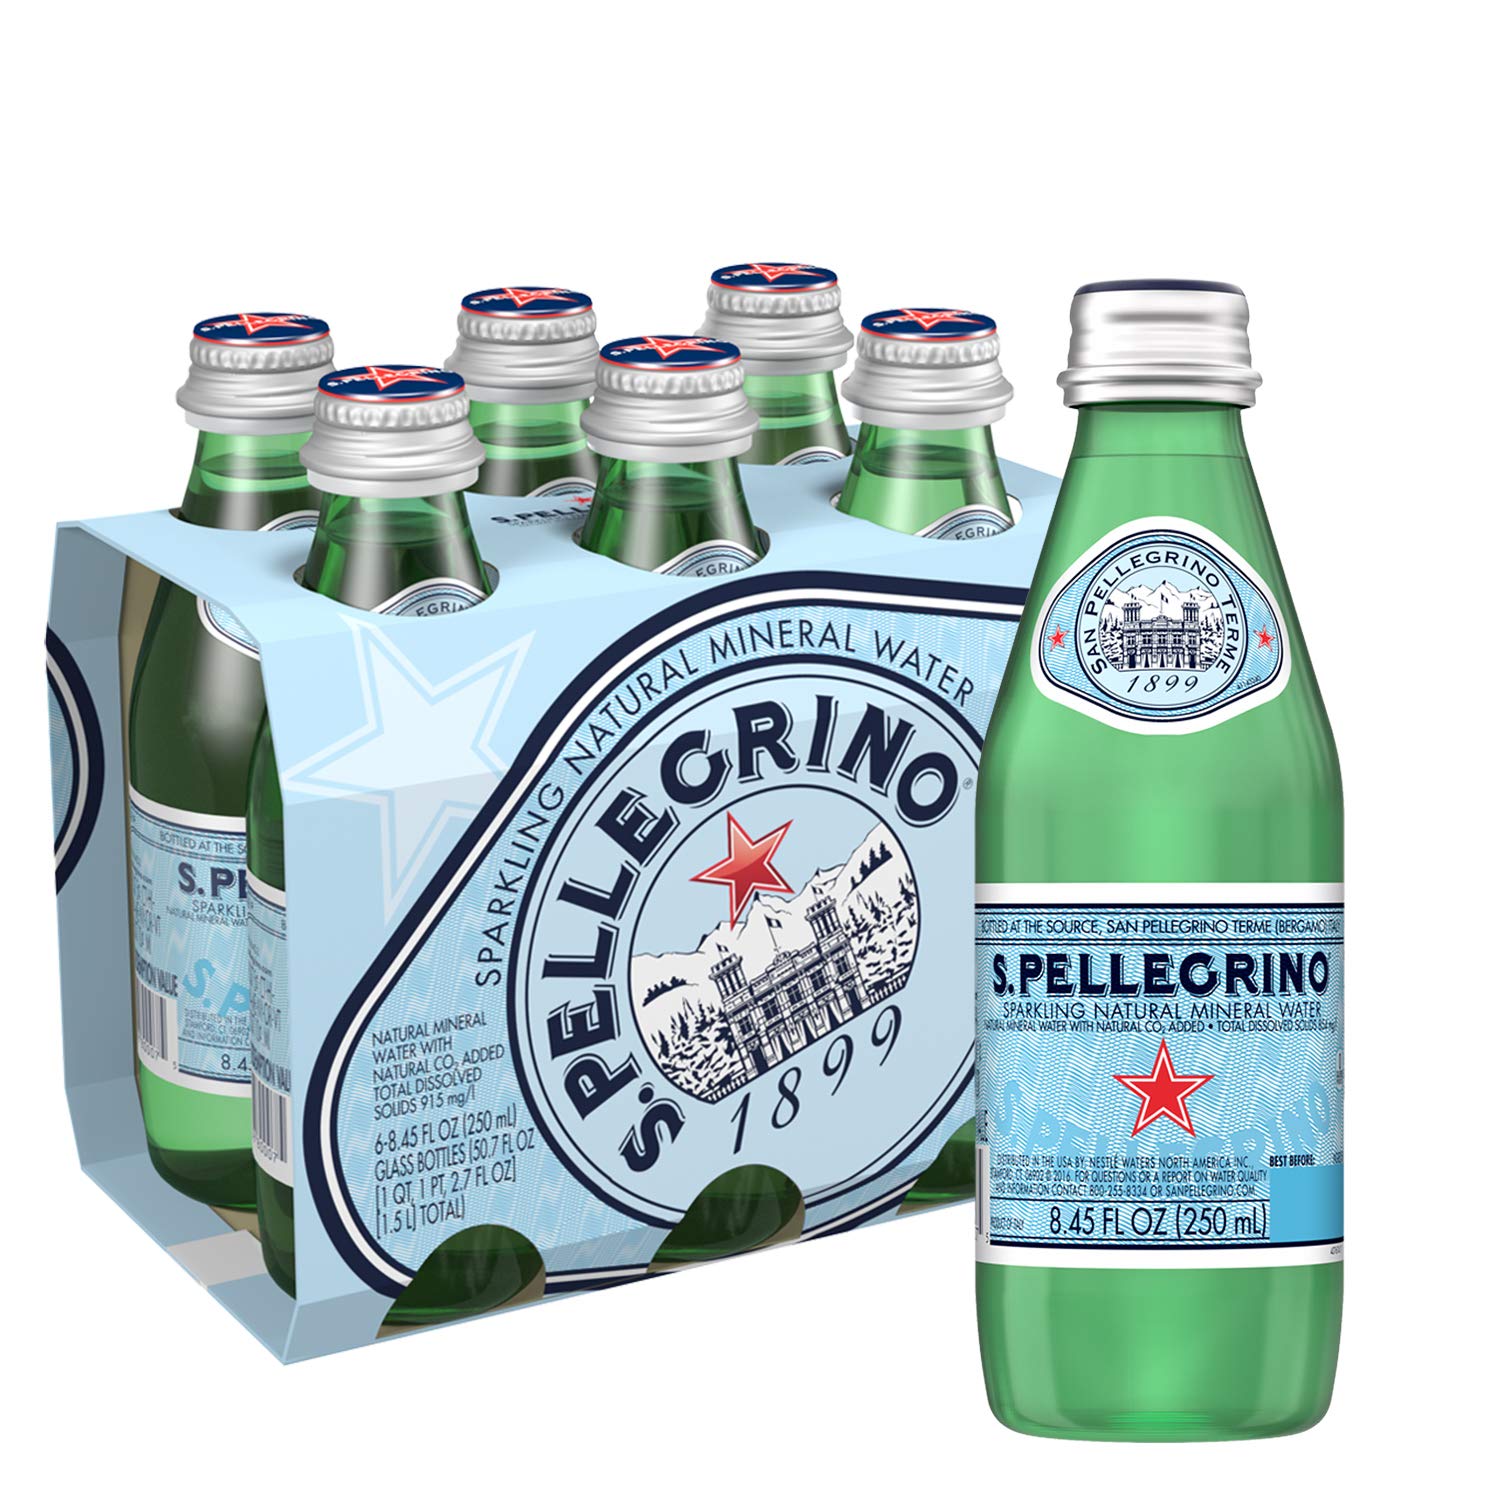 6-Count 8.45-Oz S.Pellegrino Sparkling Natural Mineral Water $4.65 + Free Shipping w/ Prime or on $35+